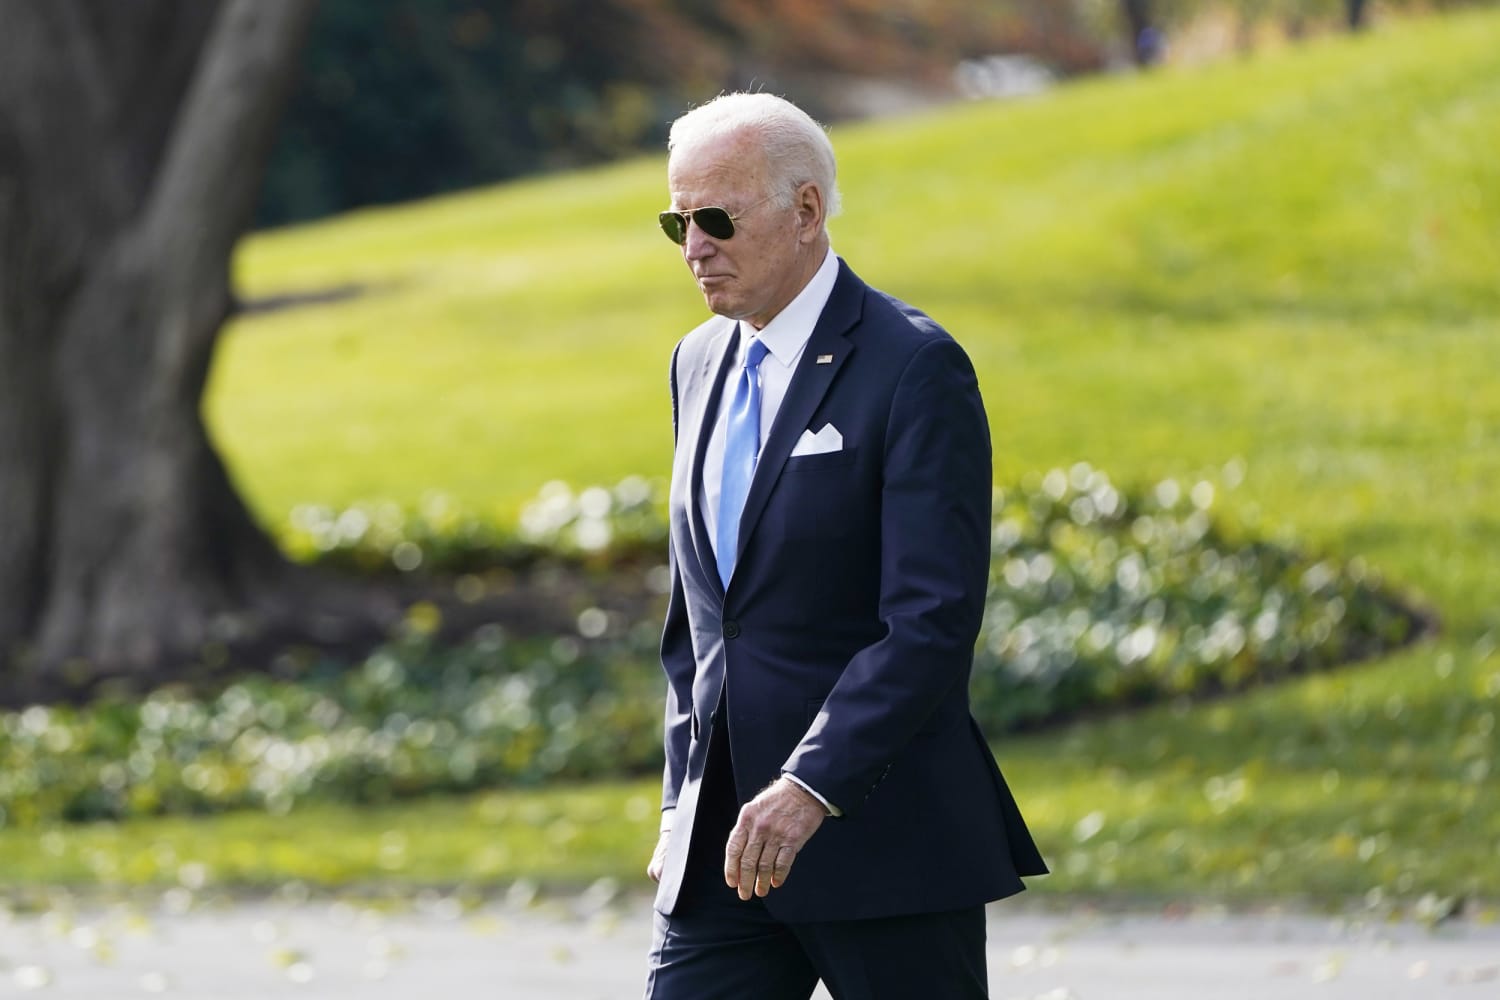 Biden was masked during contact with aide who tested positive for Covid